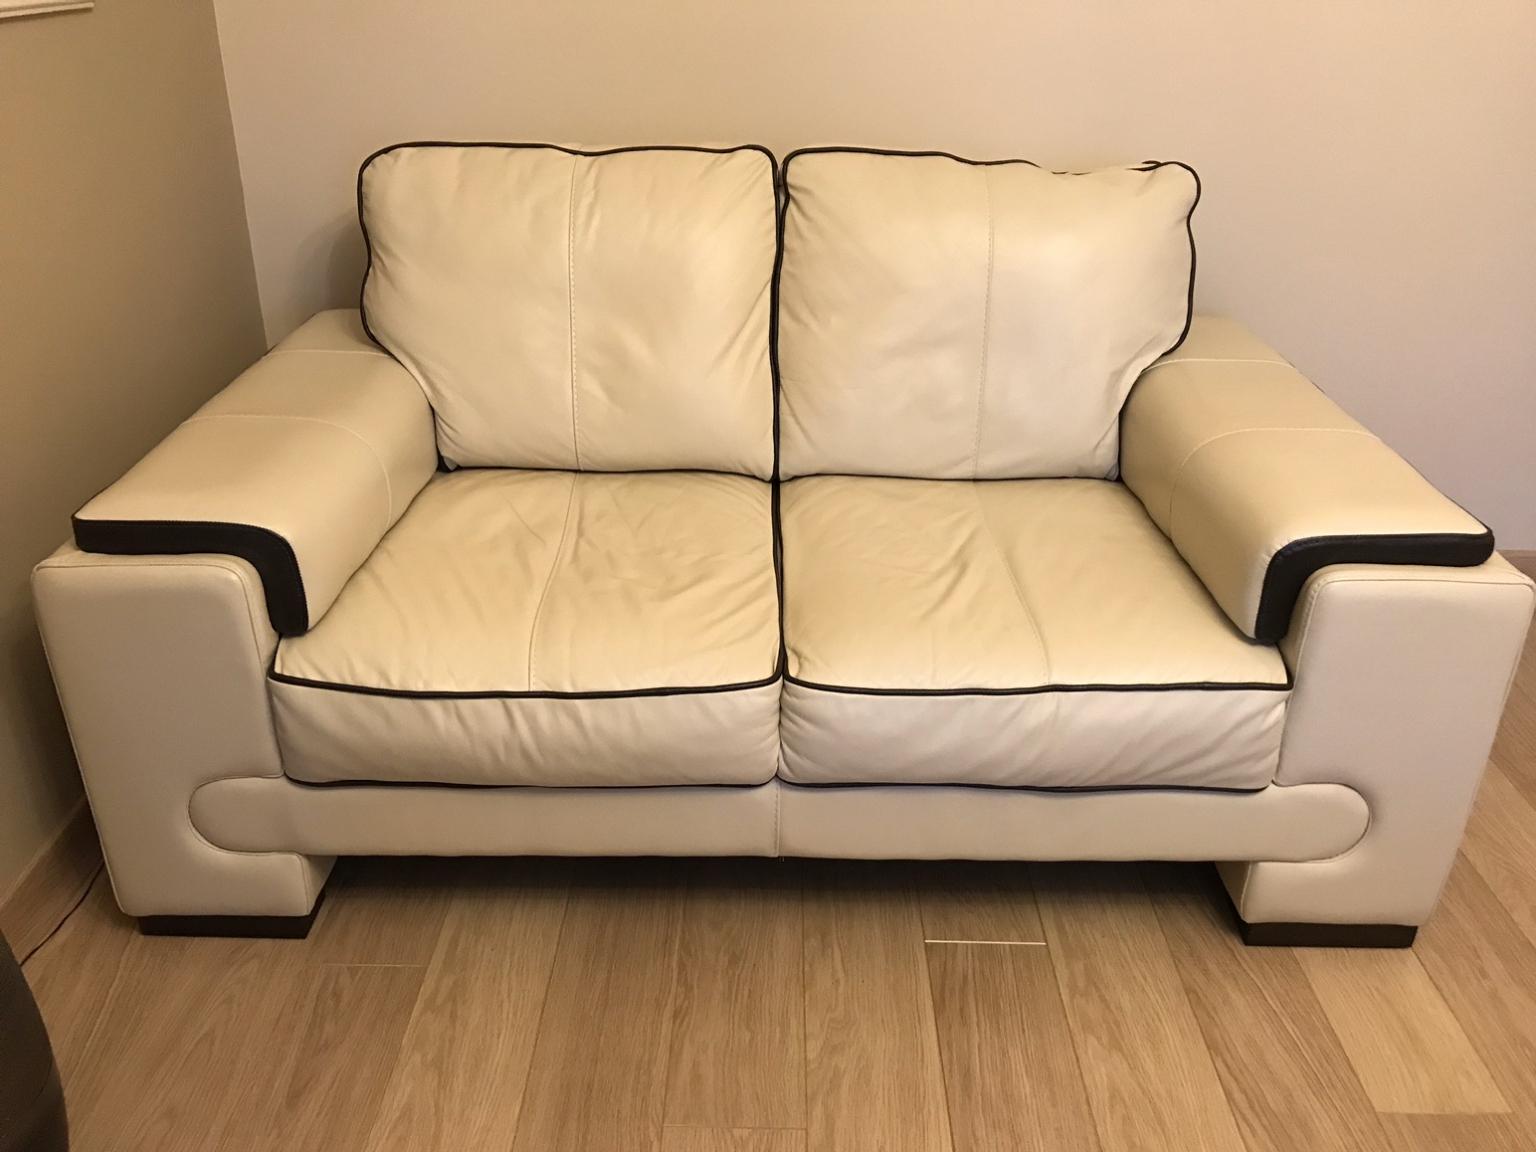 dfs leather sofa bed review